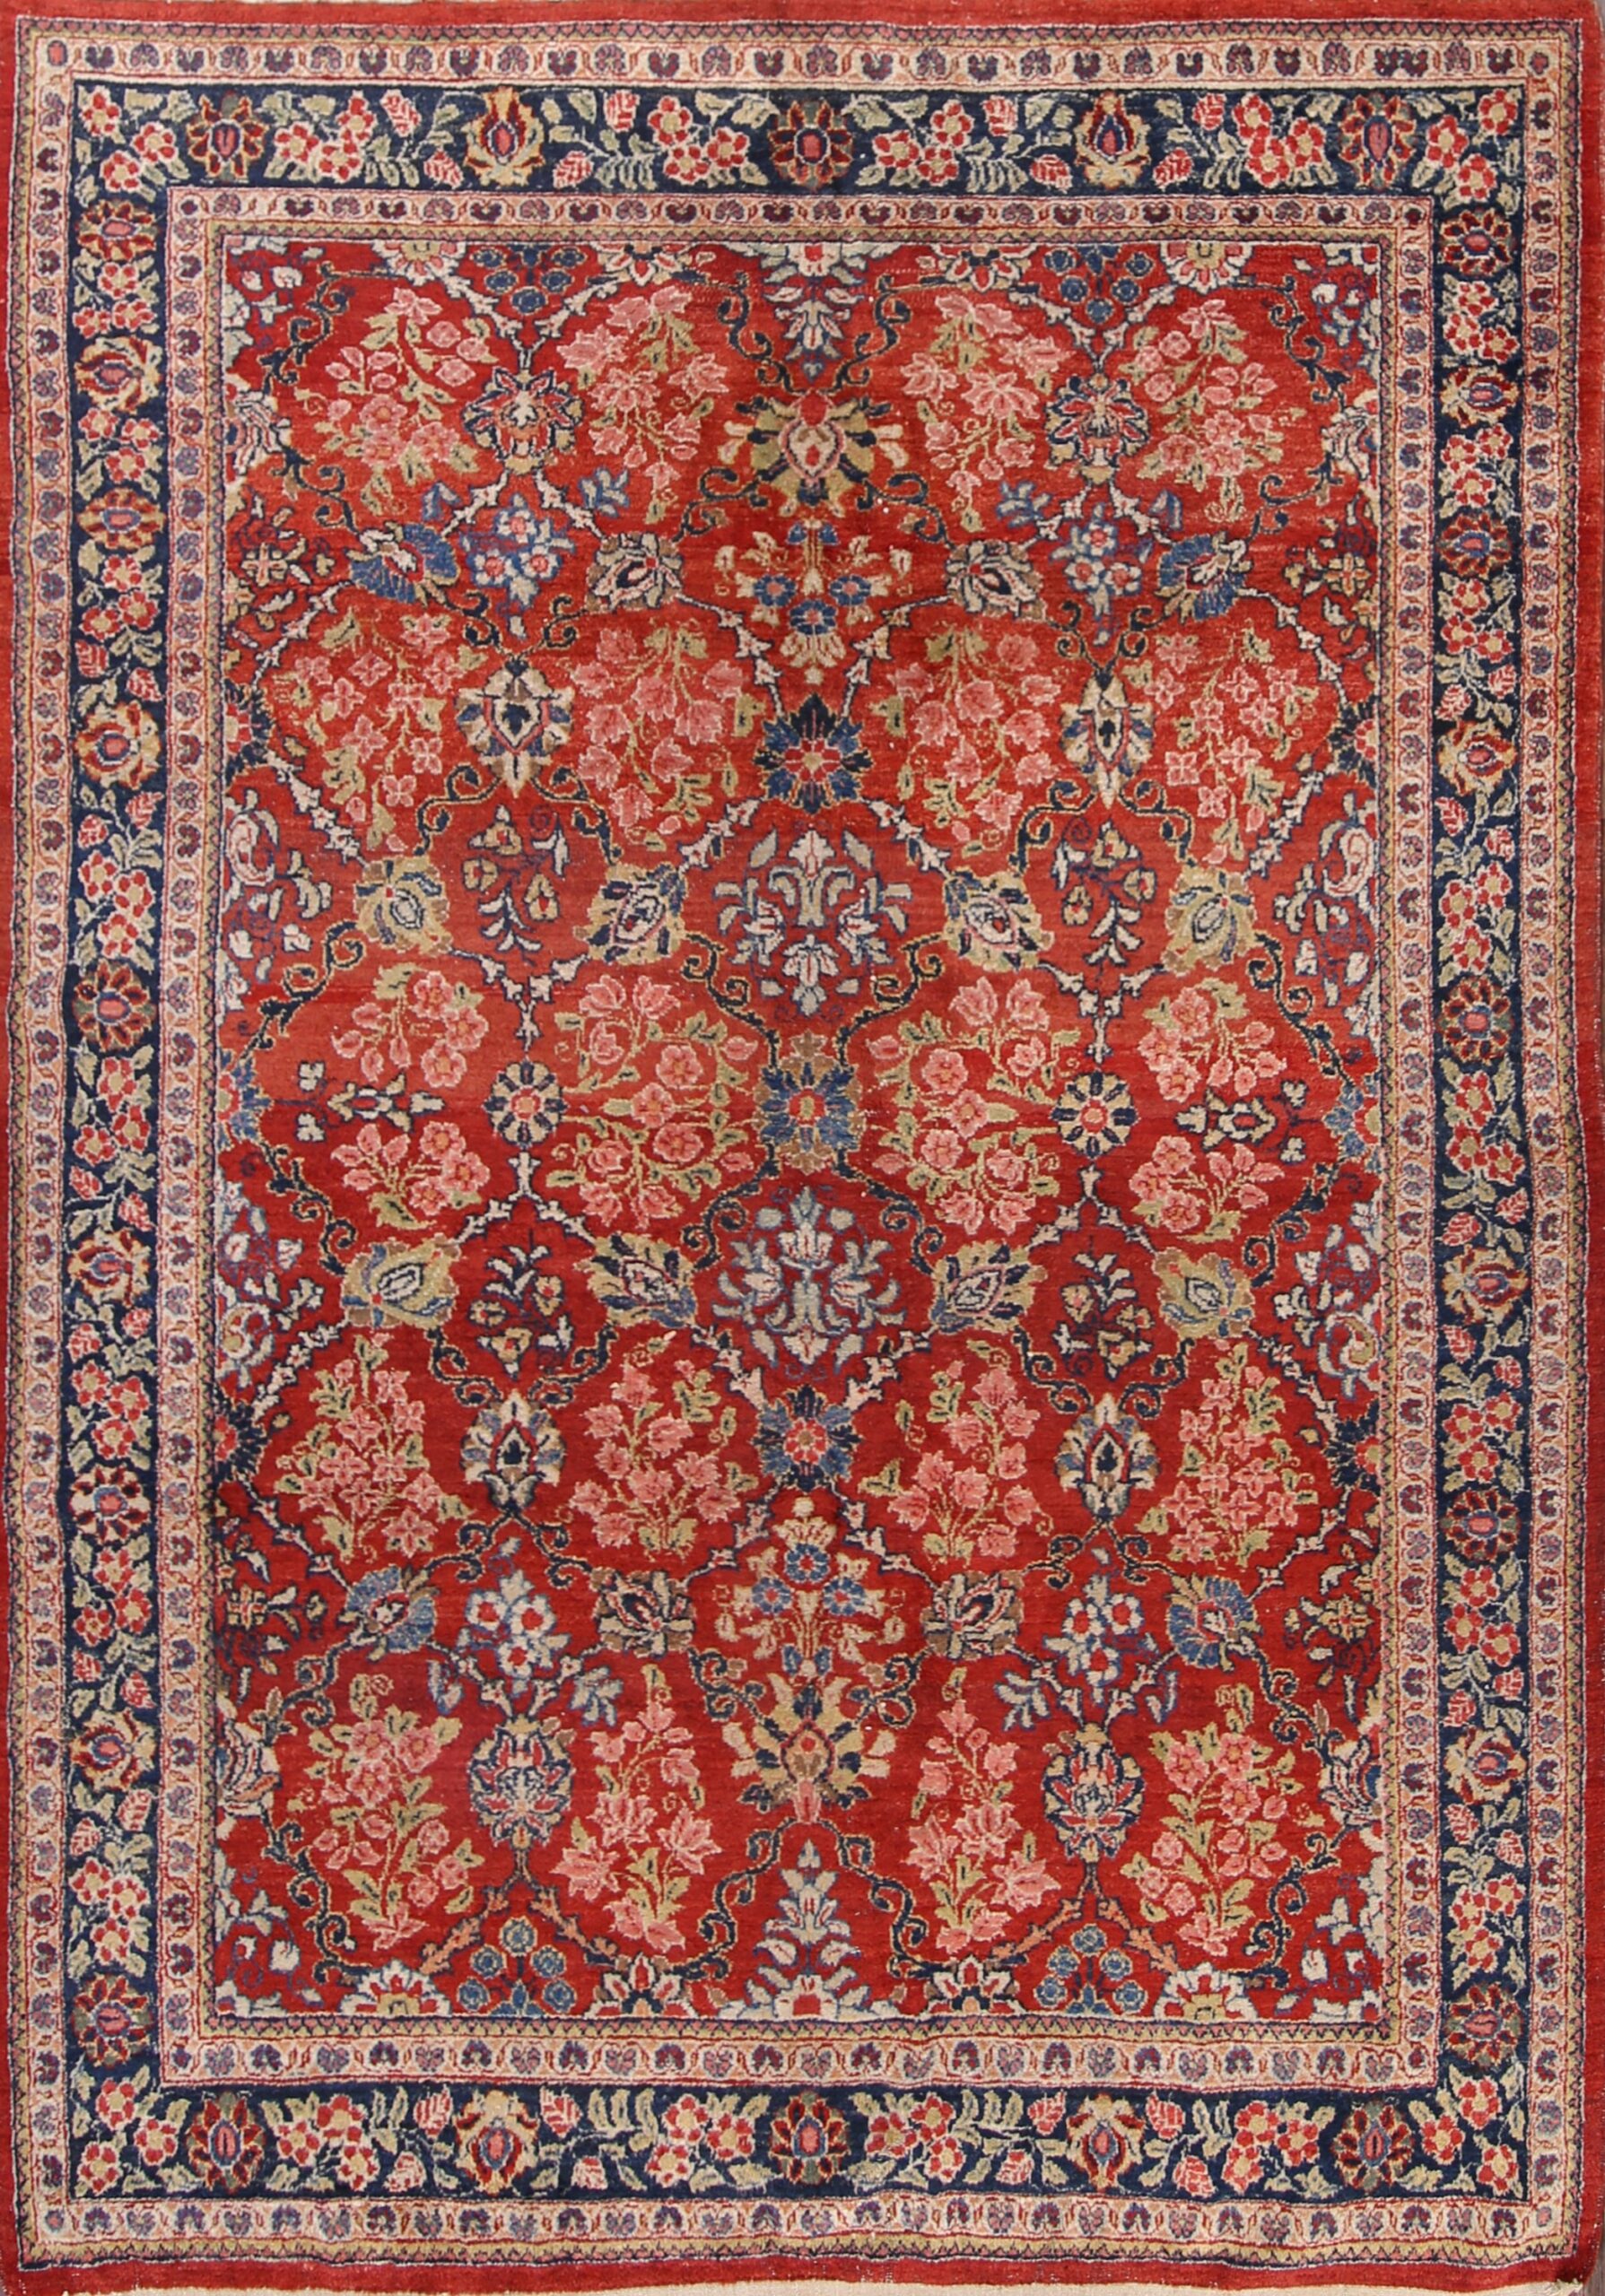 Persian area rugs- add beauty at your
place